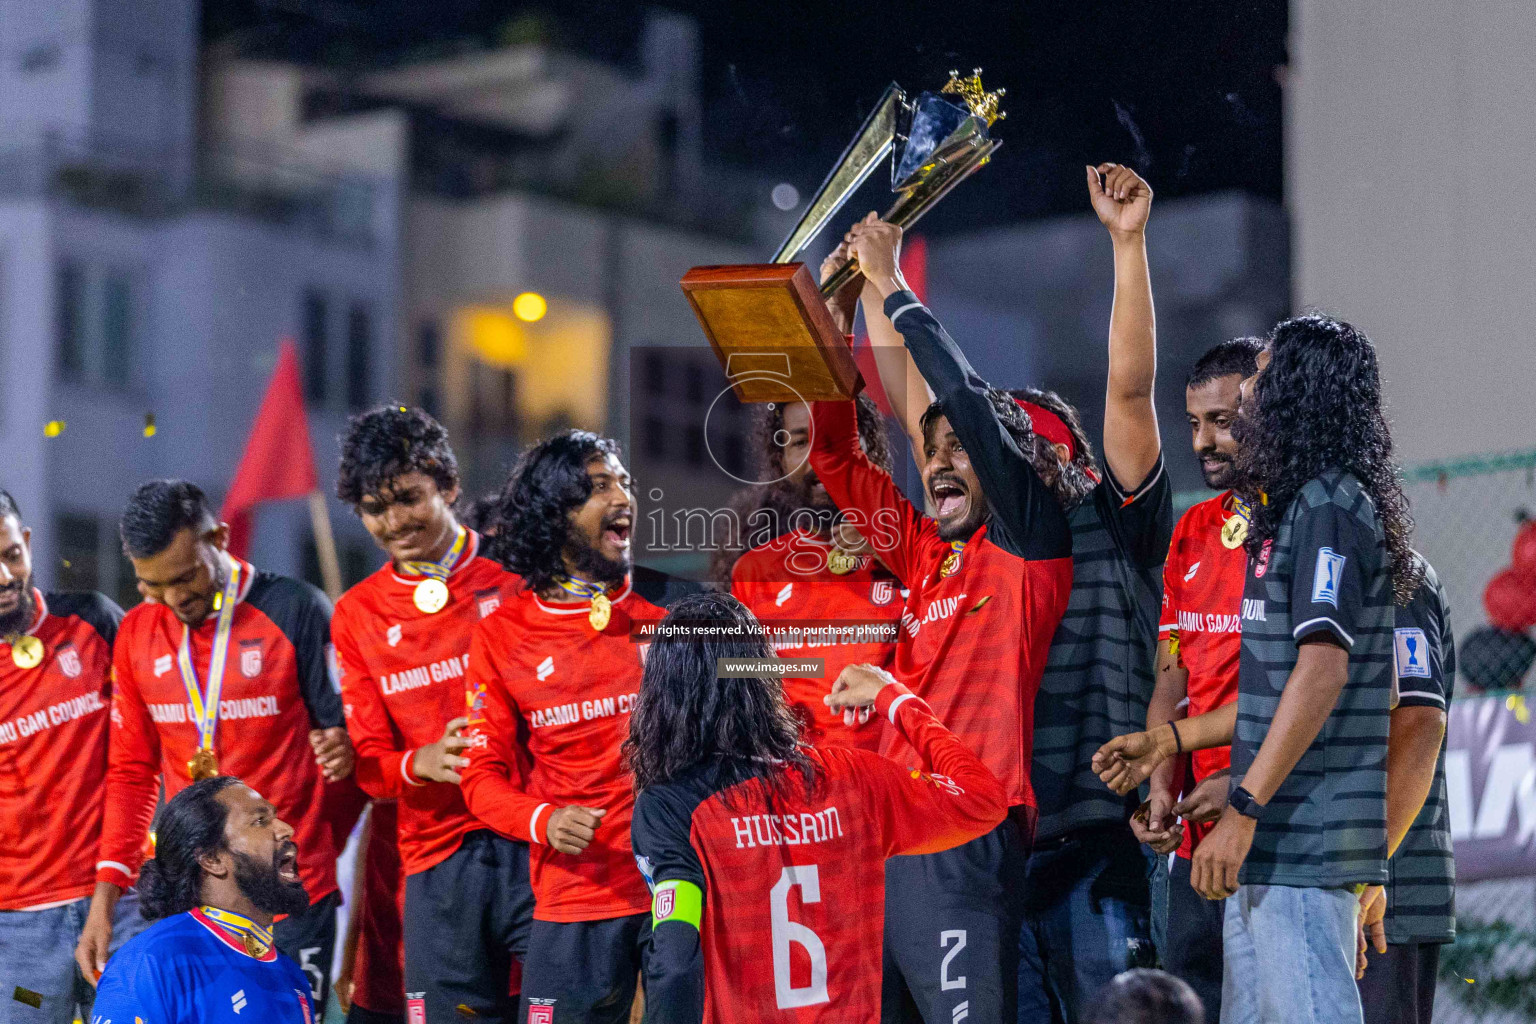 L Gan vs GDh Vaadhoo in Final of Golden Futsal Challenge 2023 was held on Sunday, 19th March 2023, in Hulhumale', Maldives Photos: Ismail Thoriq, Nausham Waheed / images.mv